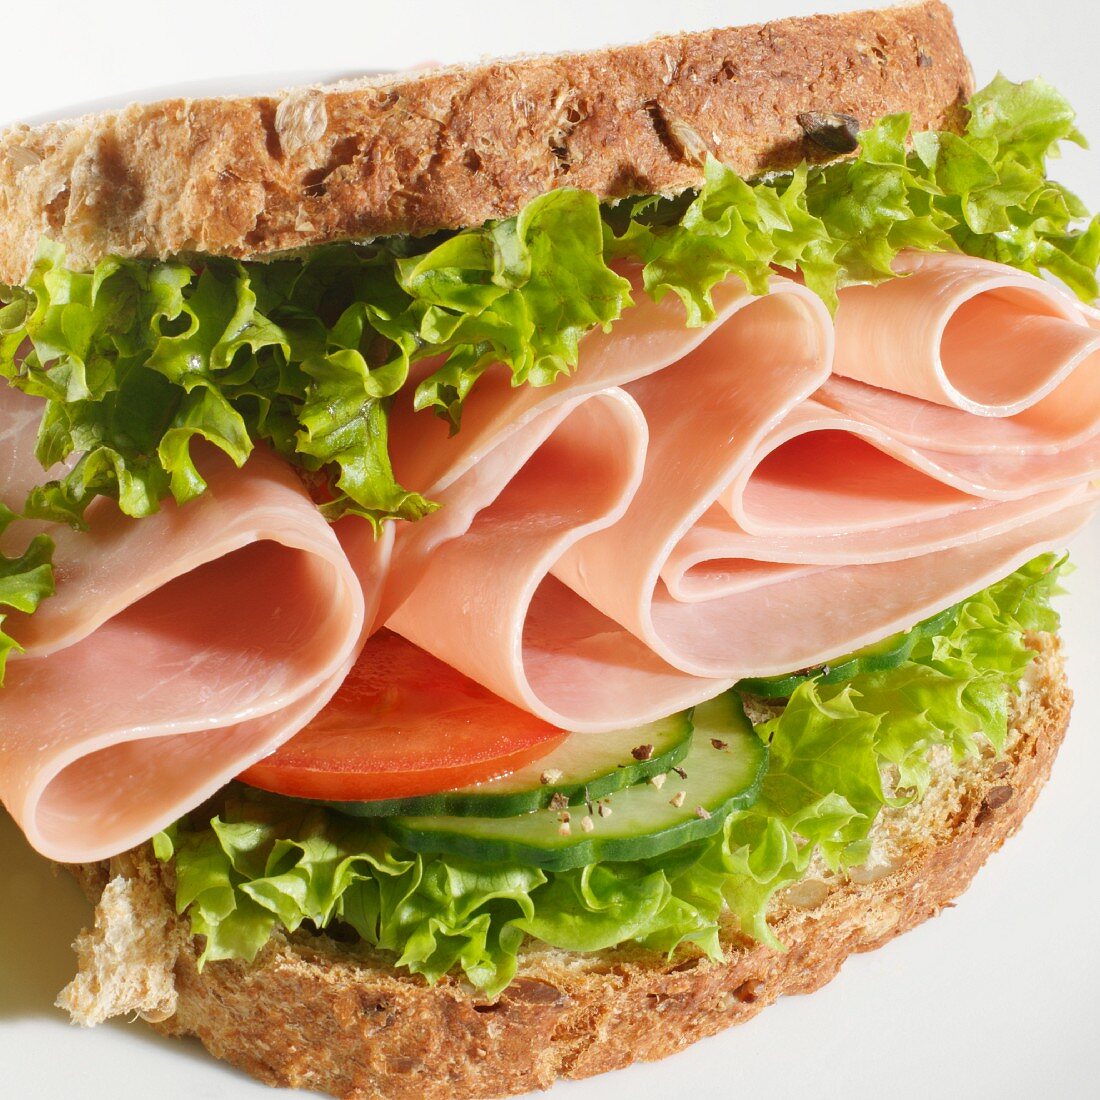 A ham sandwich with cucumber, tomato and lettuce